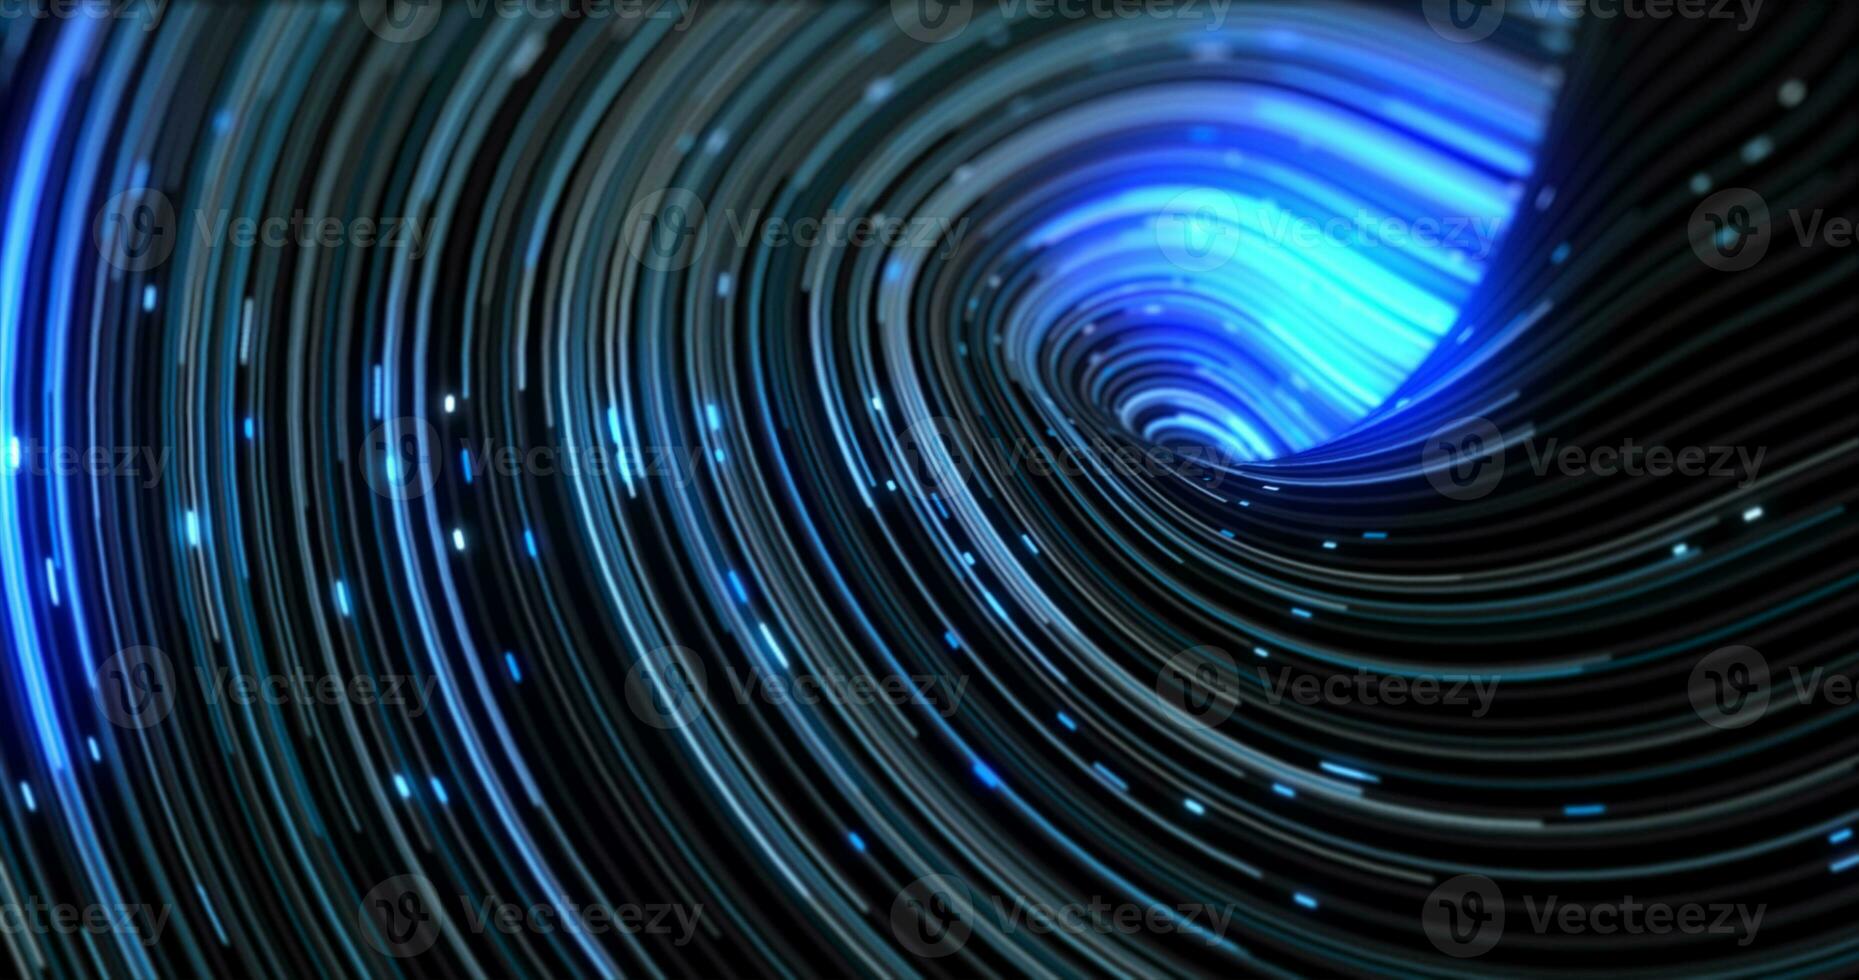 Blue energy abstract swirling curved swirl lines of glowing bright magical energy streaks and flying particles background photo